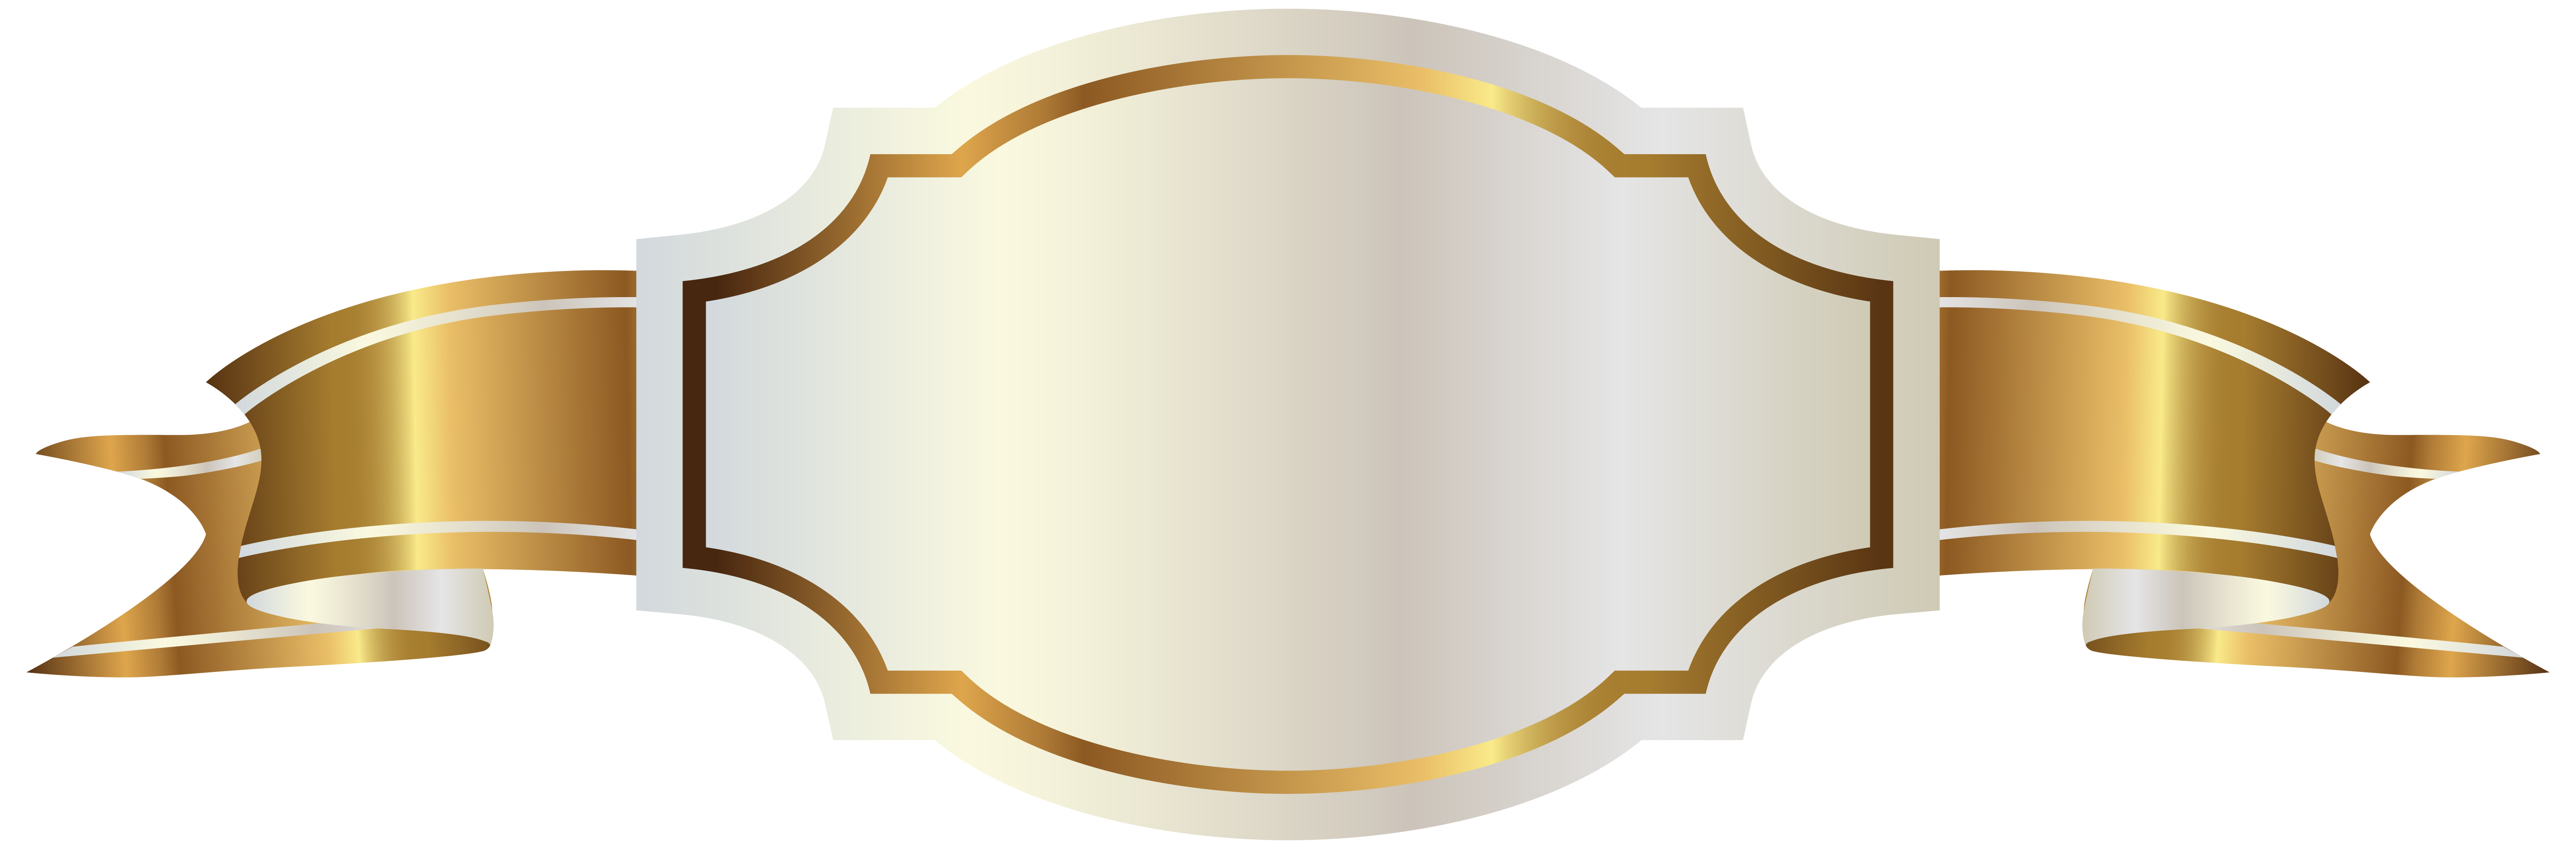 White and gold banner. Label clipart scroll